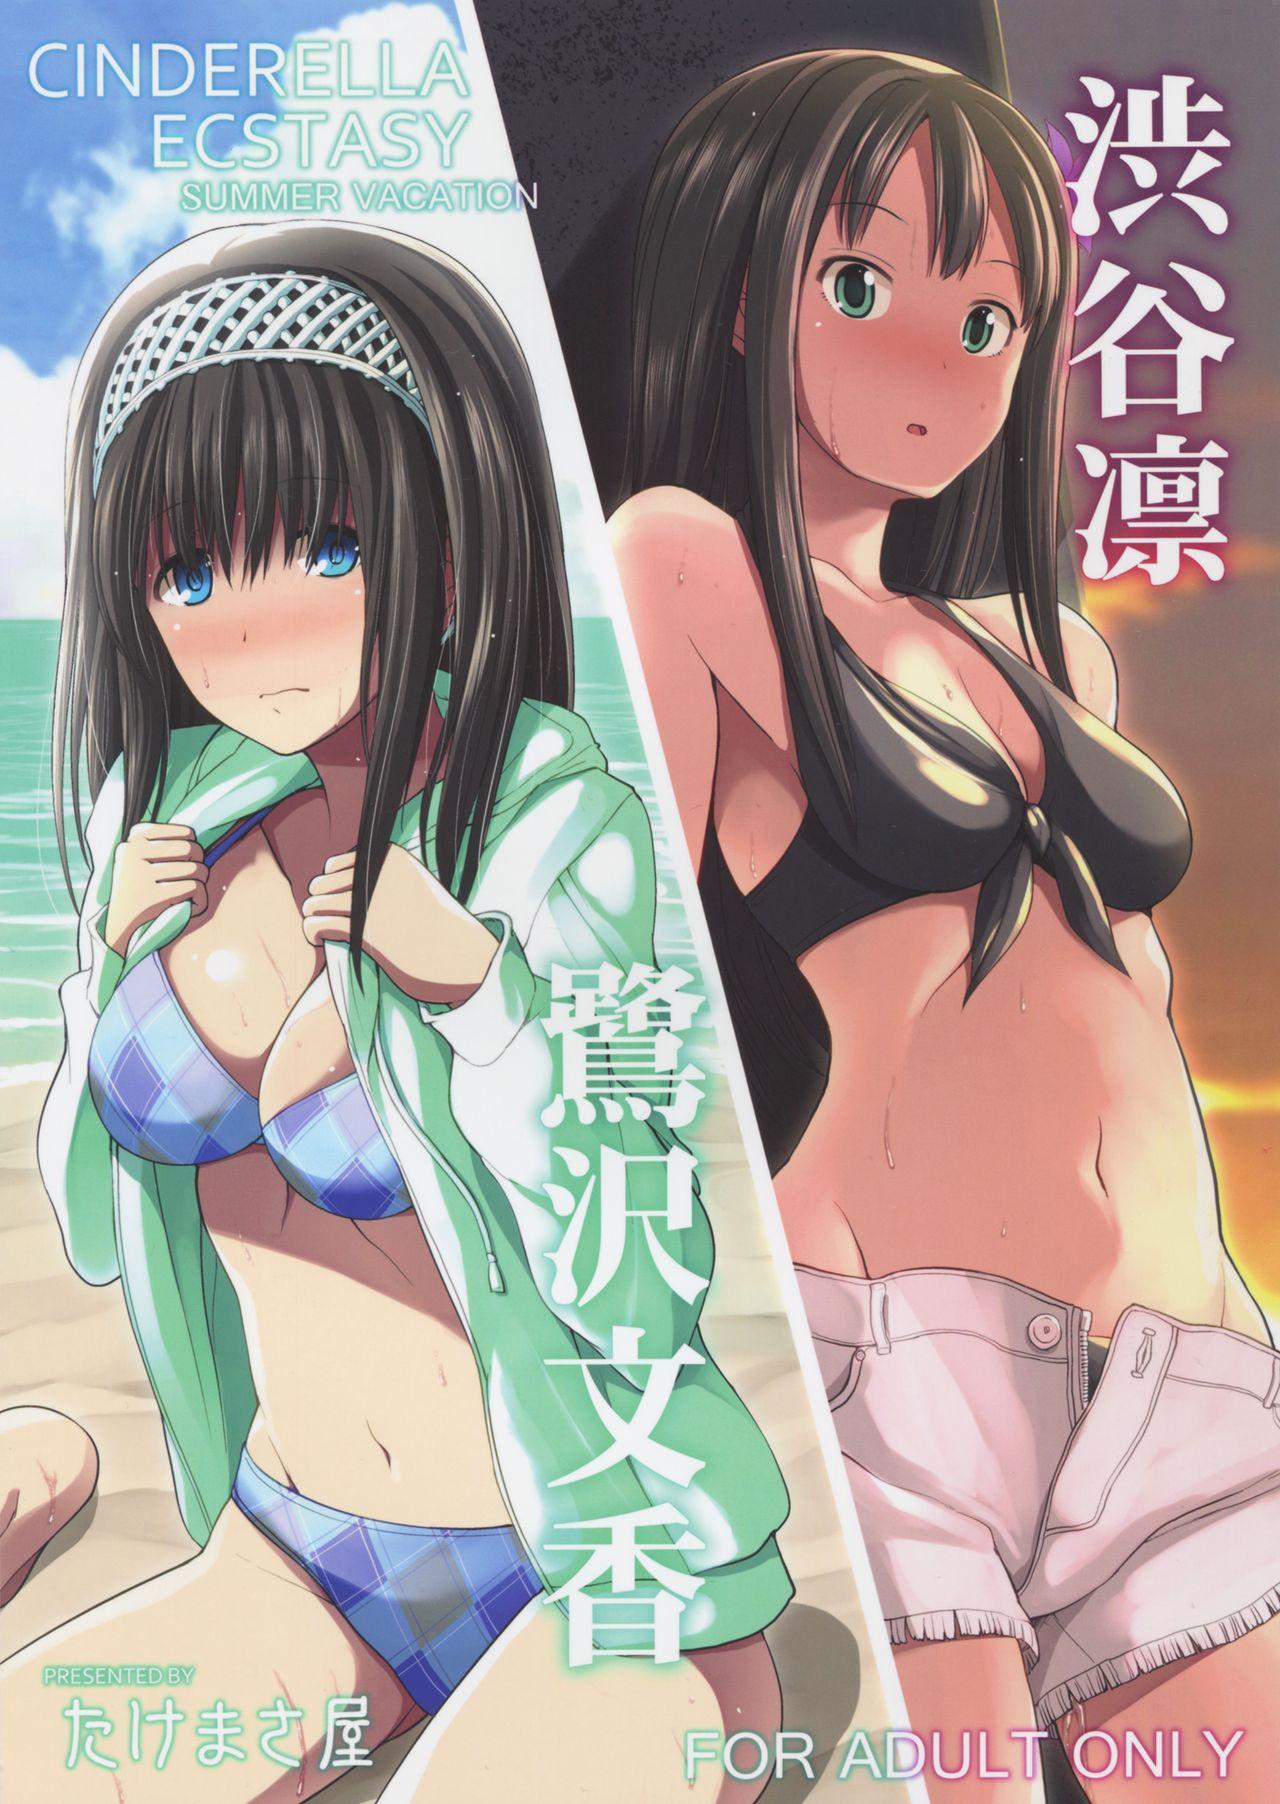 Sapphic CINDERELLA ECSTASY Summer Vacation - The idolmaster Story - Picture 1